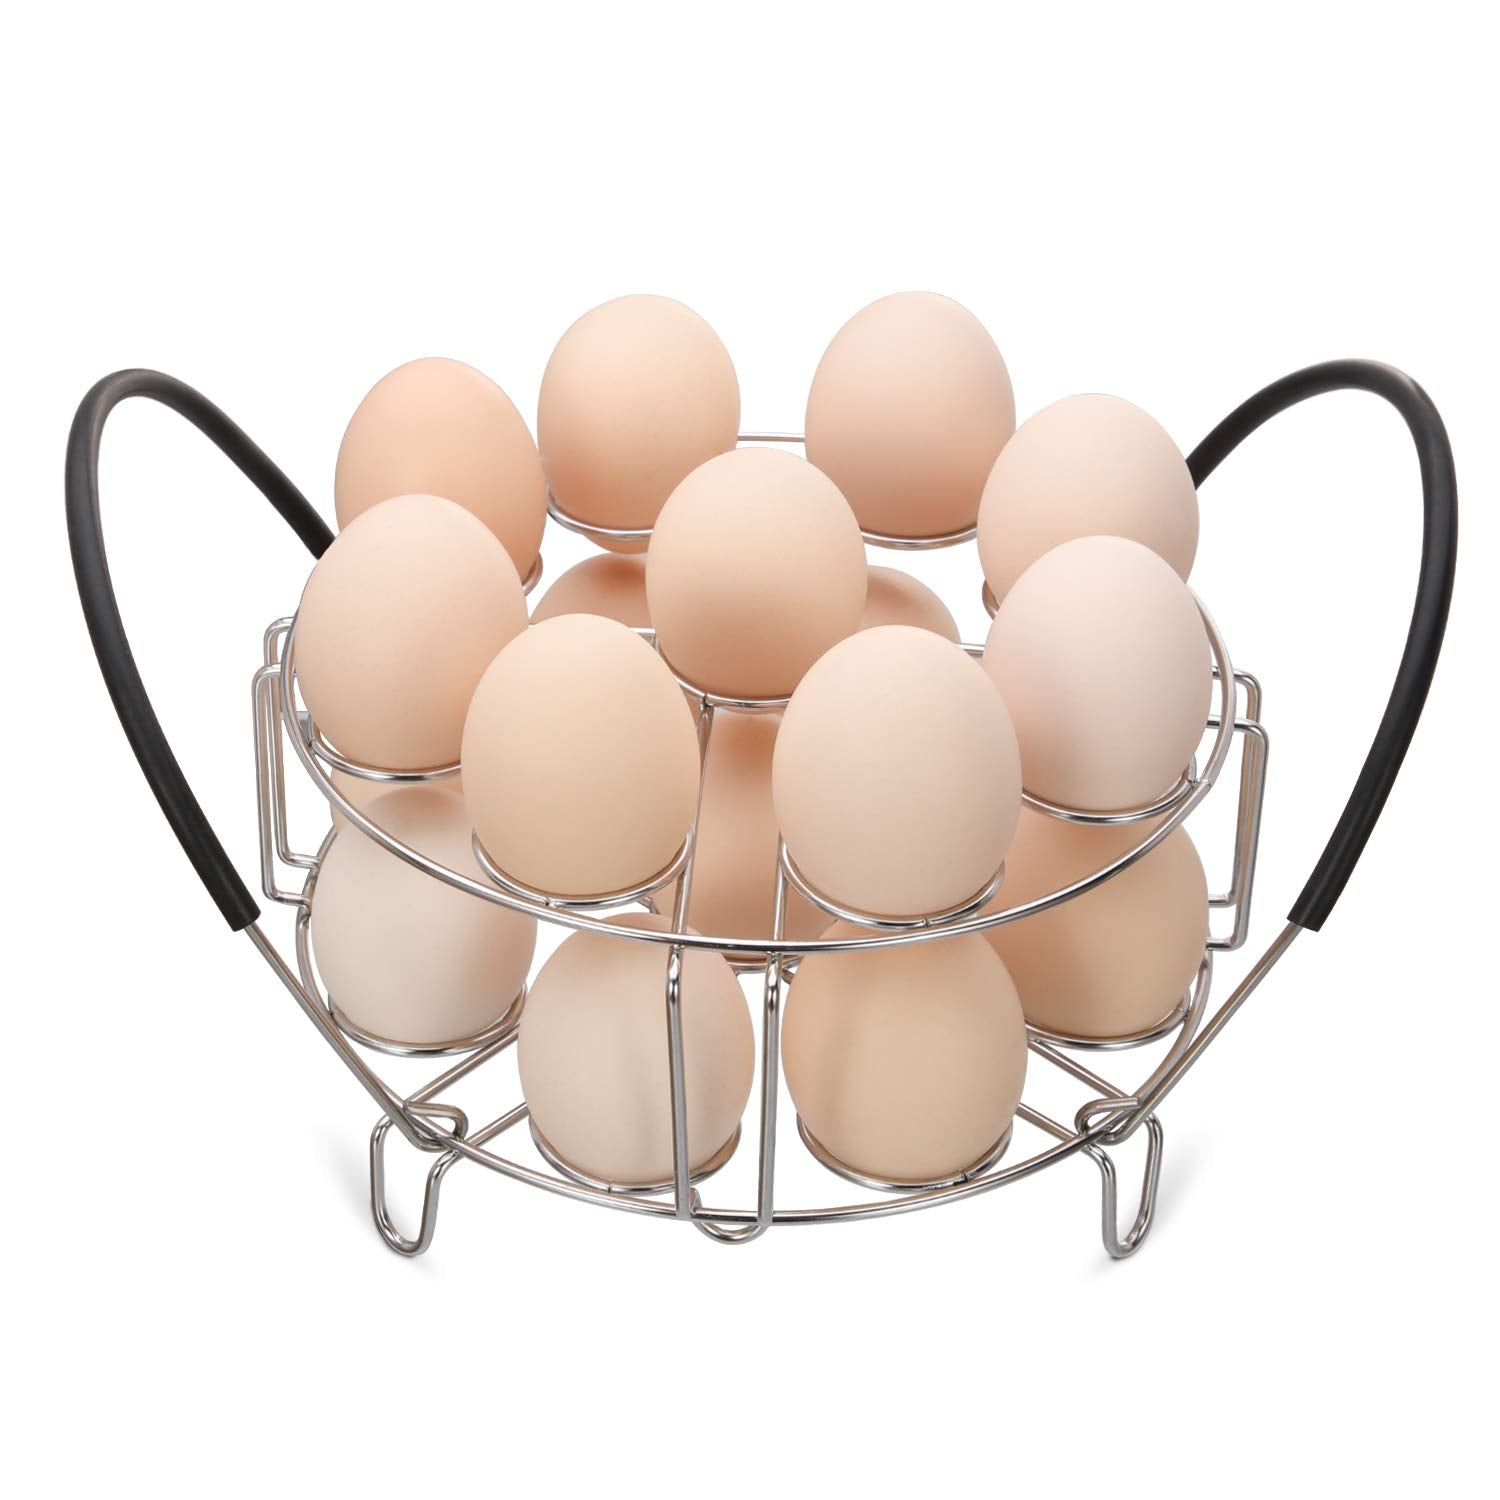 Aozita Multipurpose Stackable Egg Steamer Rack Trivet with Heat Resistant Silicone Handles Compatible for Instant Pot Accessories 6 Qt/8 Qt - 18 Egg Cooking Rack for Pressure Cooker Accessories